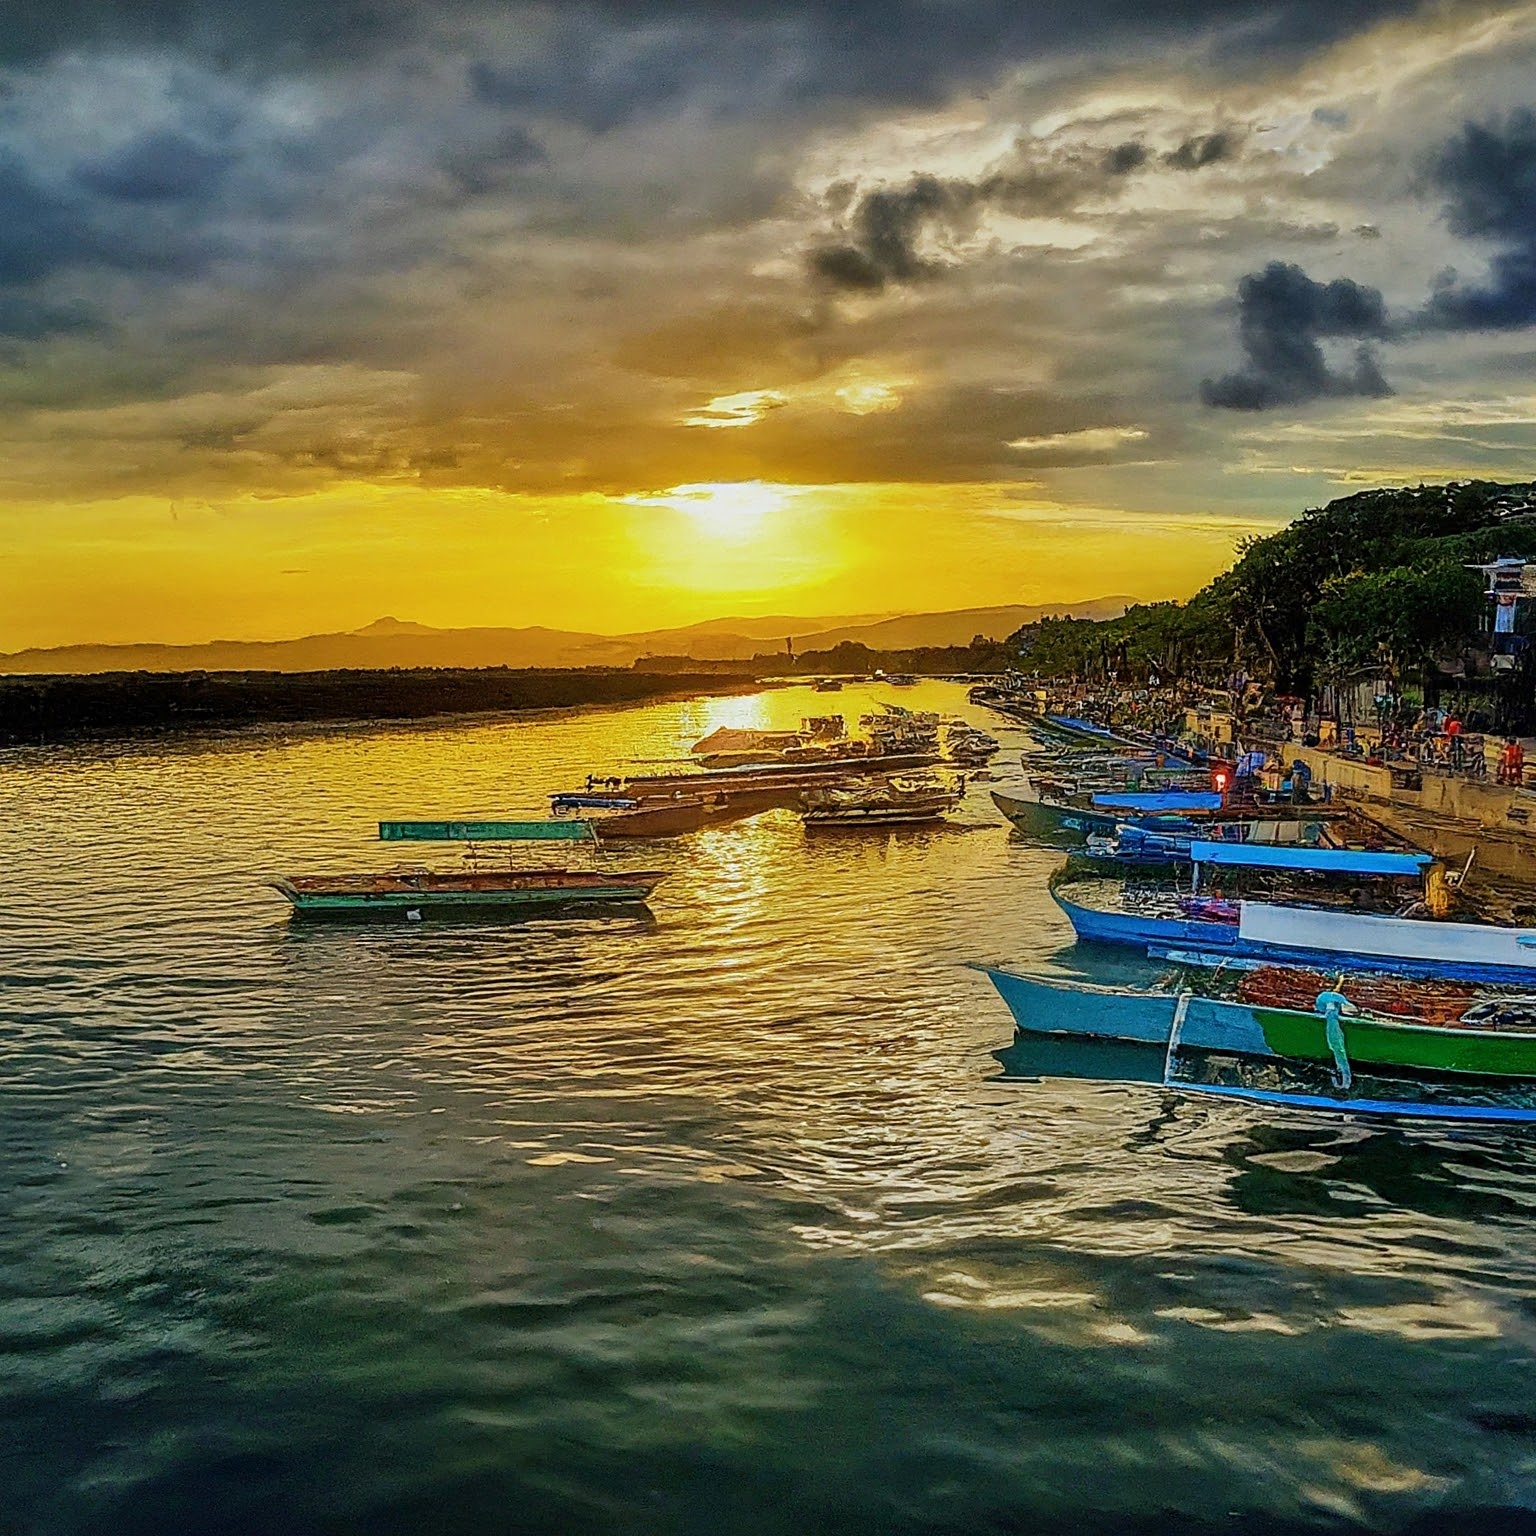 Sunset over Iloilo River Esplanade, Iloilo City, with colorful pump boats and people enjoying the waterfront.